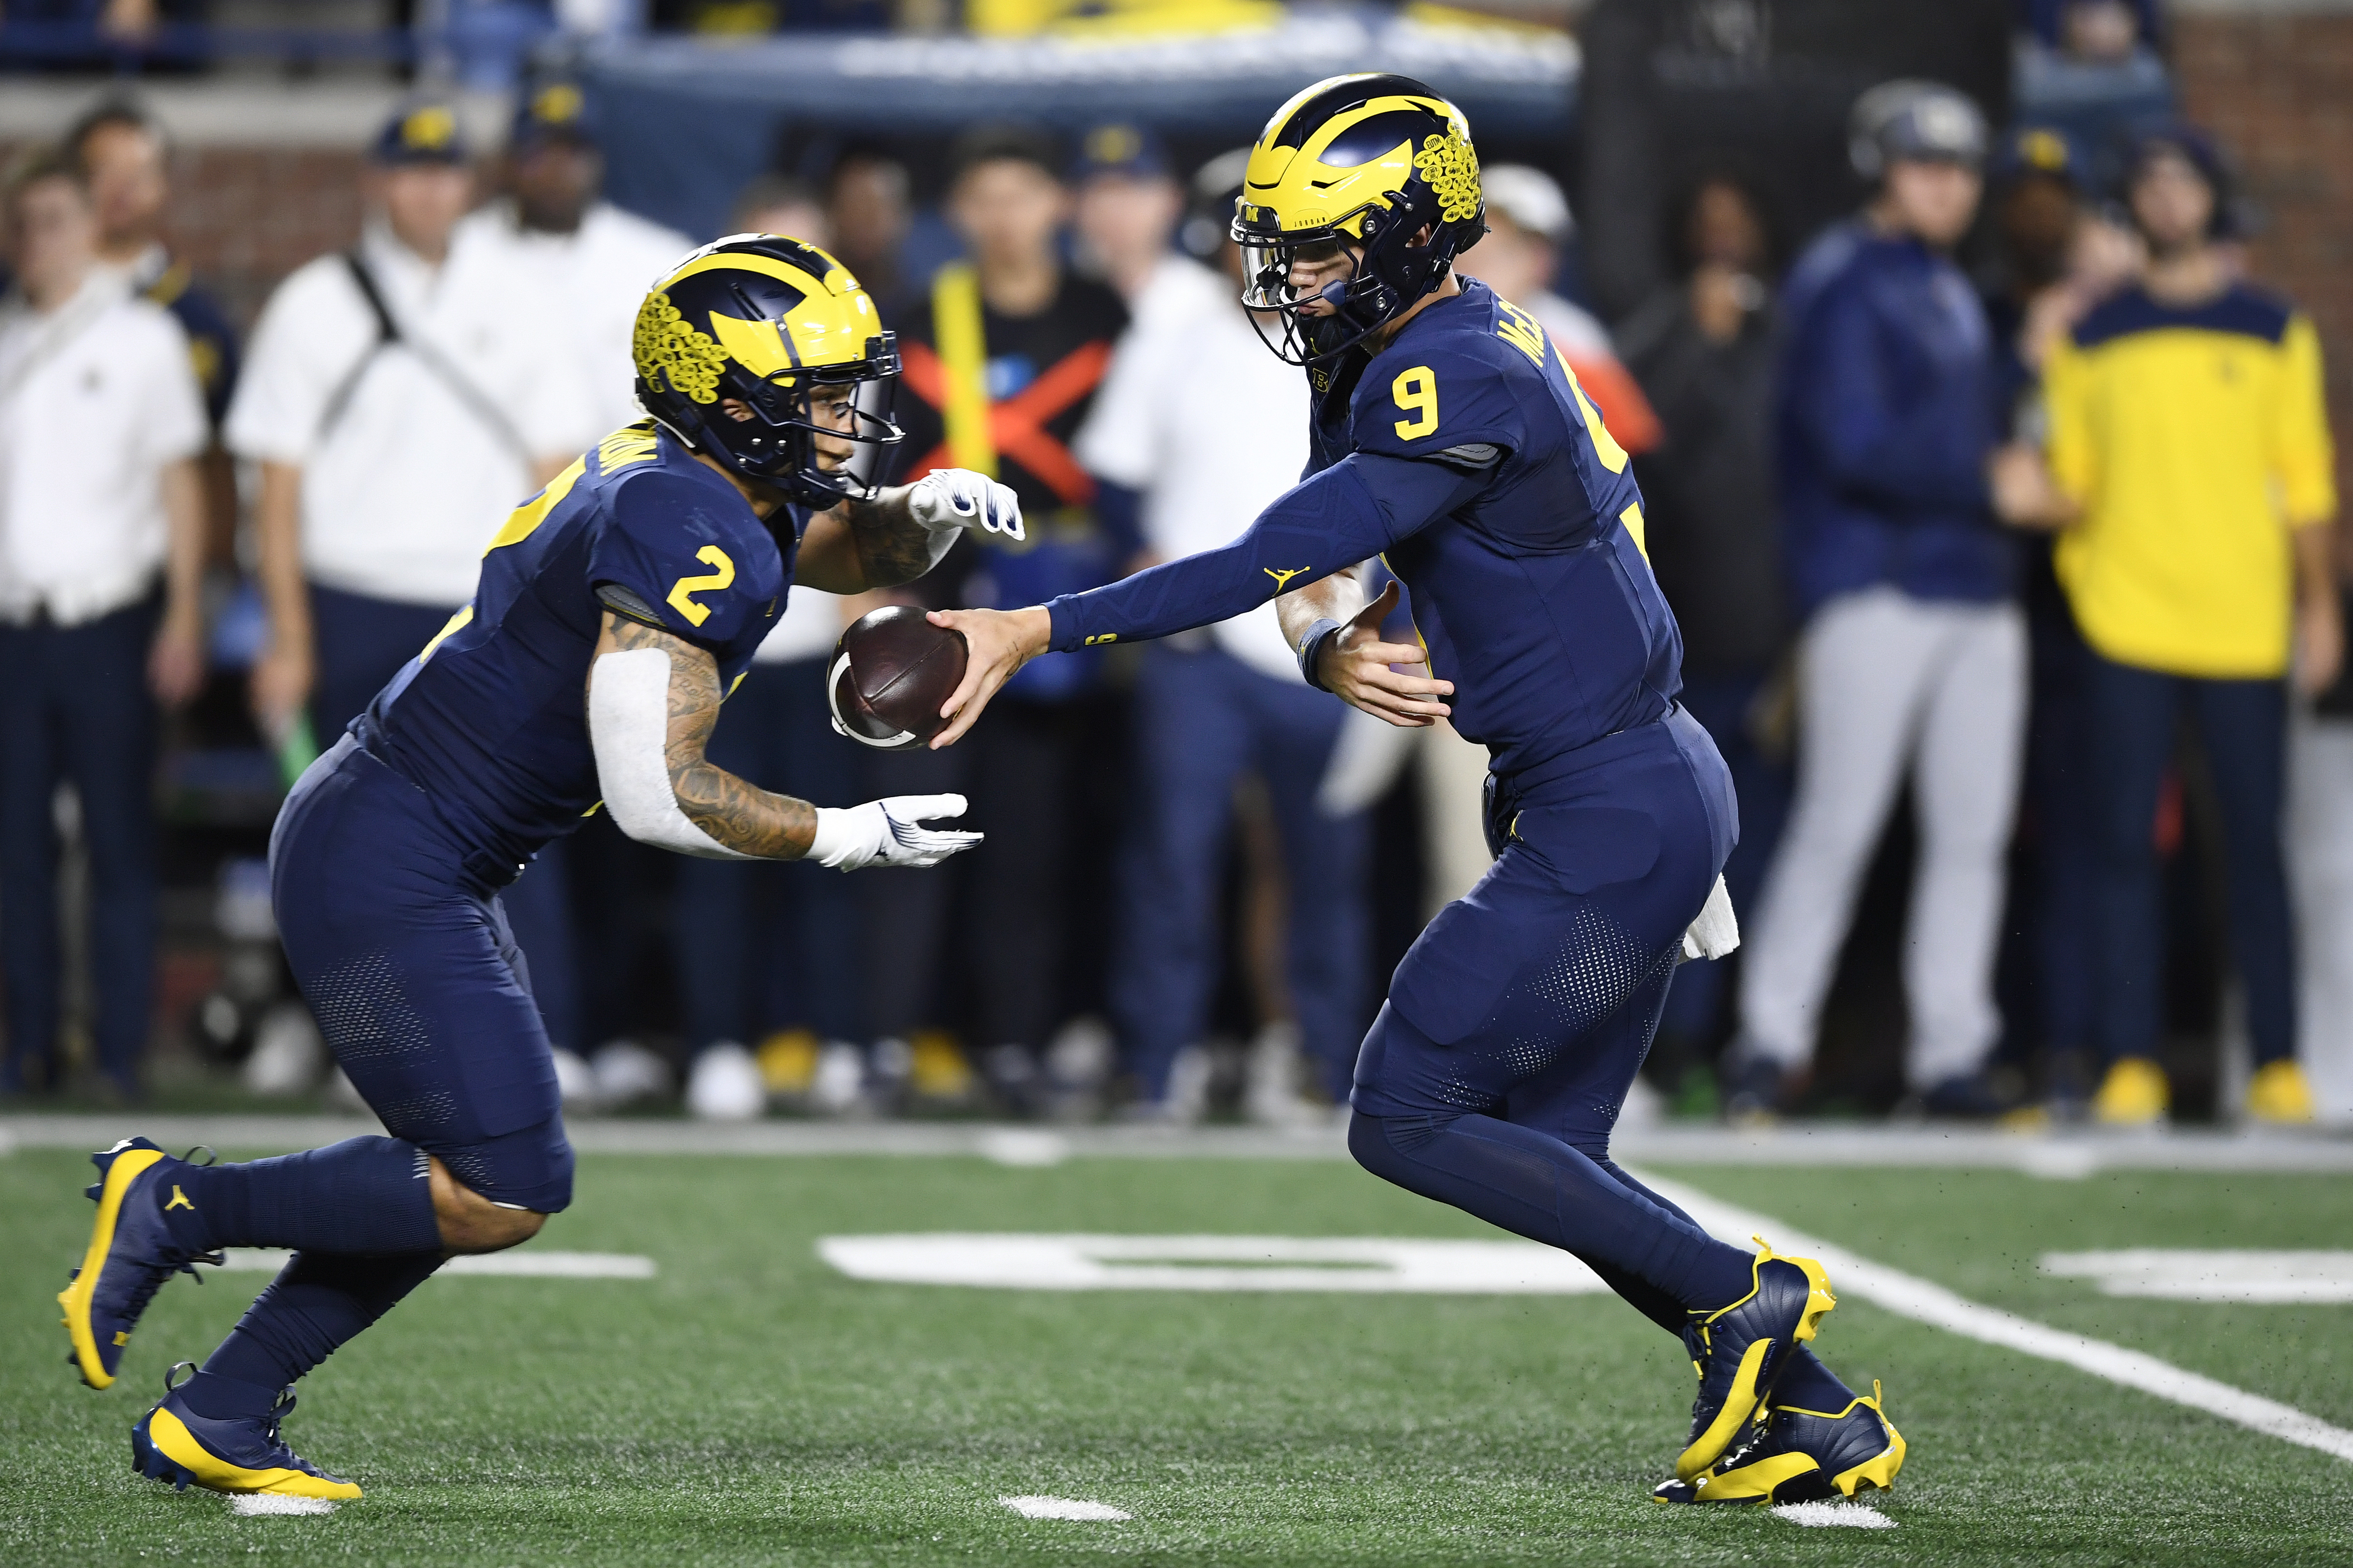 Former Michigan running back Blake Corum was paid at least $480,000 in NIL money last season, and former Wolverines quarterback J.J. McCarthy also cashed in on the school’s run to the national title.